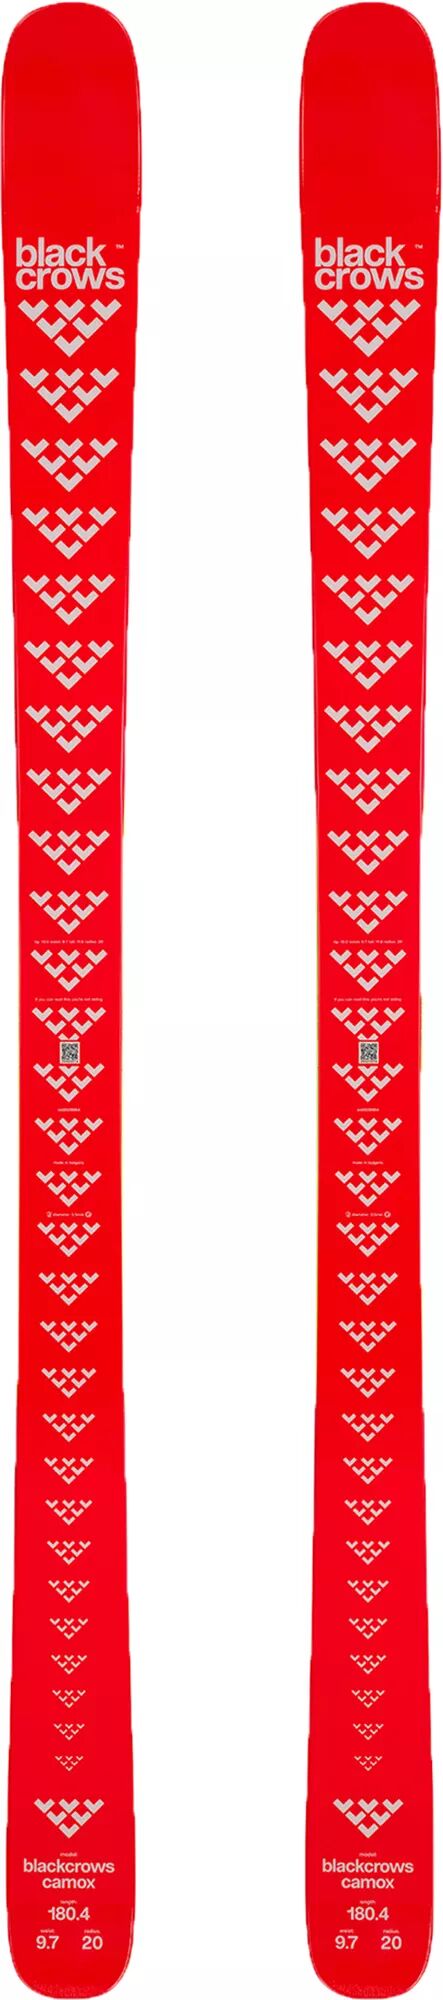 blackcrows '23-'24 Men's Camox All-Mountain Skis, Red